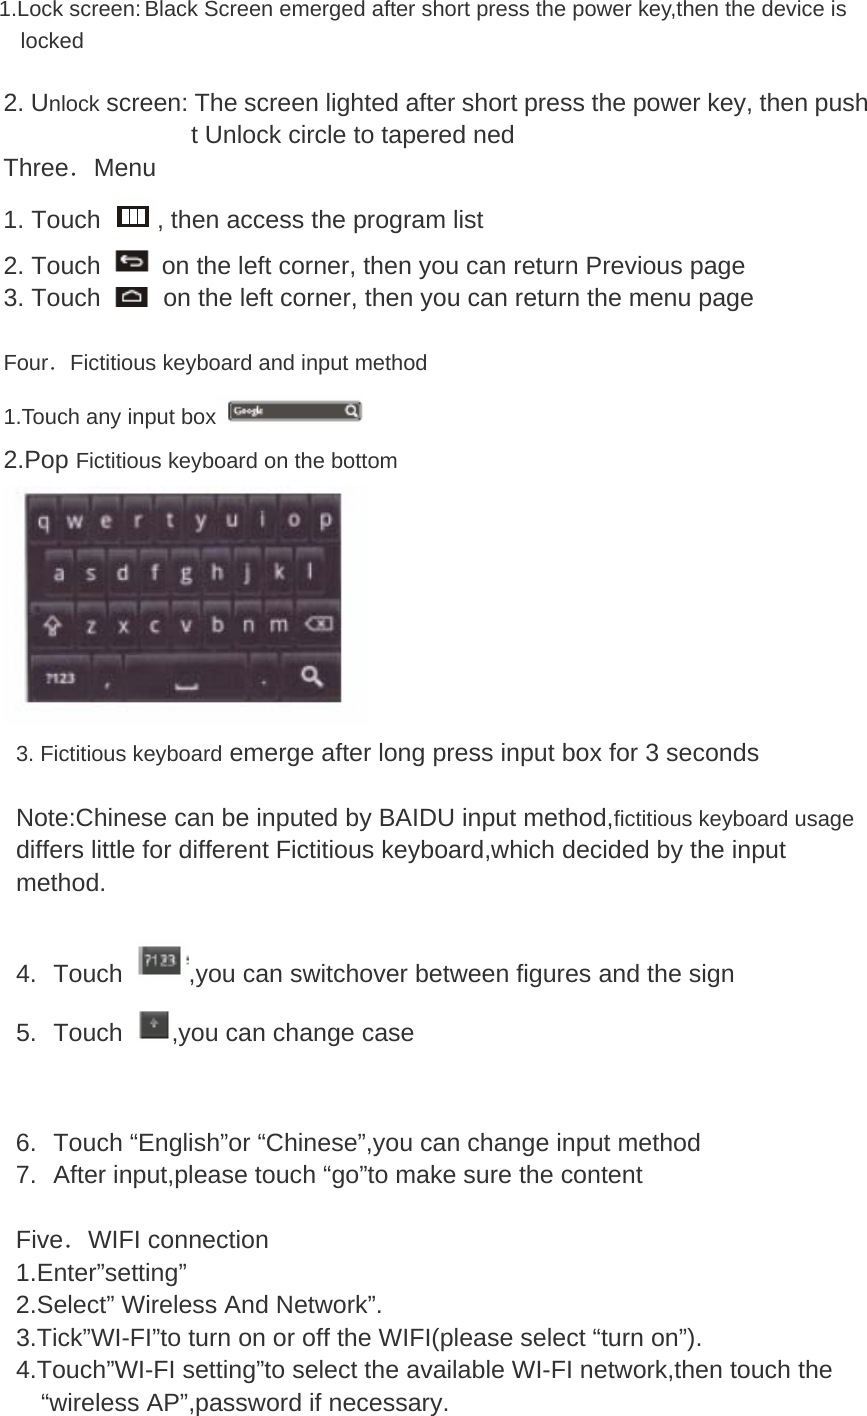 1.Lock screen: Black Screen emerged after short press the power key,then the device is locked 2. Unlock screen: The screen lighted after short press the power key, then push t Unlock circle to tapered ned Three．Menu 1. Touch  , then access the program list 2. Touch    on the left corner, then you can return Previous page 3. Touch    on the left corner, then you can return the menu page  Four．Fictitious keyboard and input method 1.Touch any input box  2.Pop Fictitious keyboard on the bottom  3. Fictitious keyboard emerge after long press input box for 3 seconds    Note:Chinese can be inputed by BAIDU input method,fictitious keyboard usage differs little for different Fictitious keyboard,which decided by the input method.  4. Touch  ,you can switchover between figures and the sign 5. Touch  ,you can change case   6.  Touch “English”or “Chinese”,you can change input method 7.  After input,please touch “go”to make sure the content  Five．WIFI connection 1.Enter”setting” 2.Select” Wireless And Network”.   3.Tick”WI-FI”to turn on or off the WIFI(please select “turn on”).   4.Touch”WI-FI setting”to select the available WI-FI network,then touch the “wireless AP”,password if necessary. 